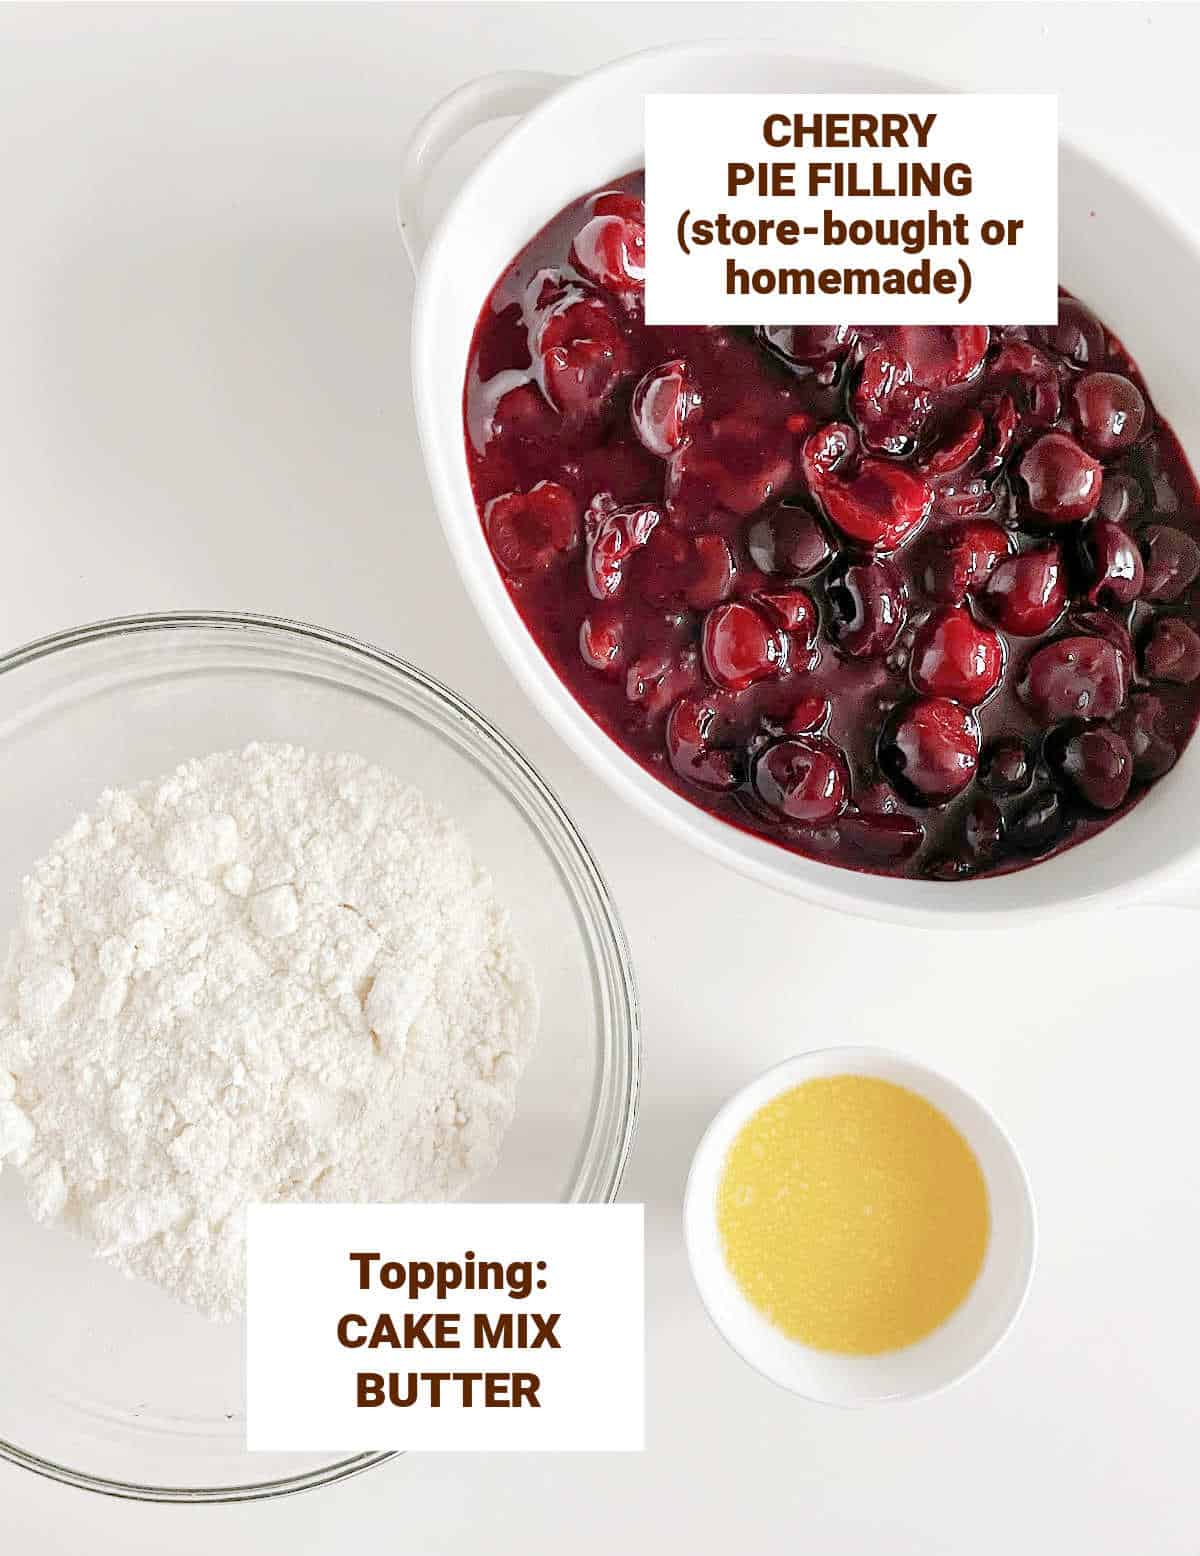 White surface with bowls containing ingredients for cherry dump cake including pie filling, butter, cake mix. Brown text overlay.